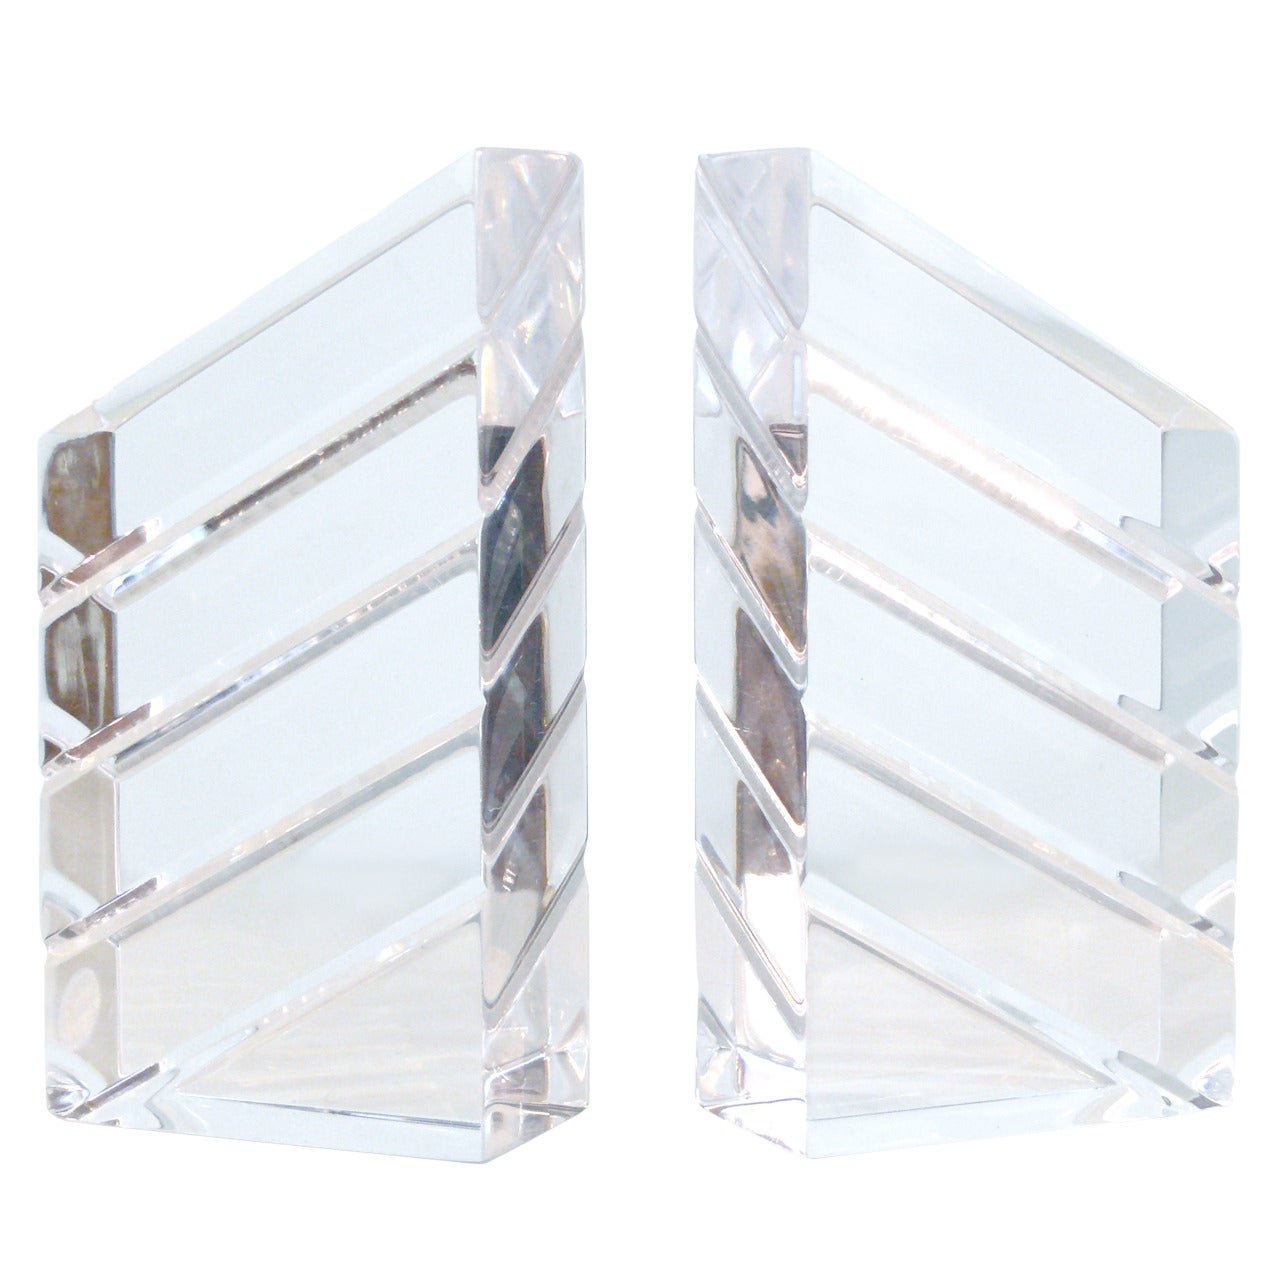 Pair of Acrylic Sculptural Bookends Signed Astrolite